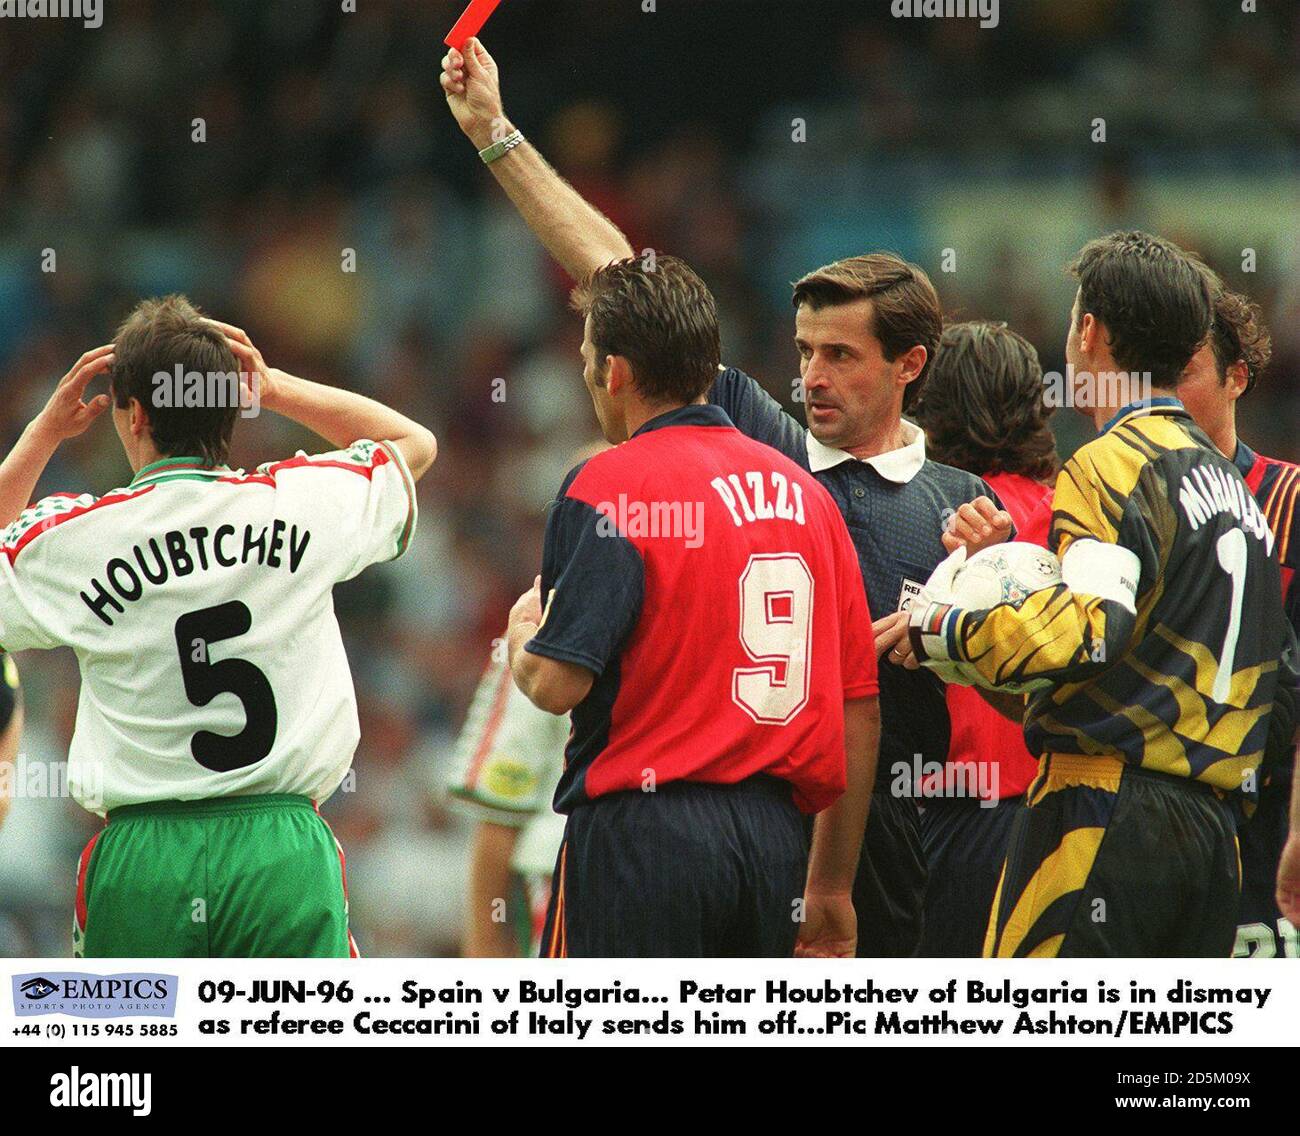 Petar Houbtchev of Bulgaria is in dismay as referee Ceccarini sends him off Stock Photo